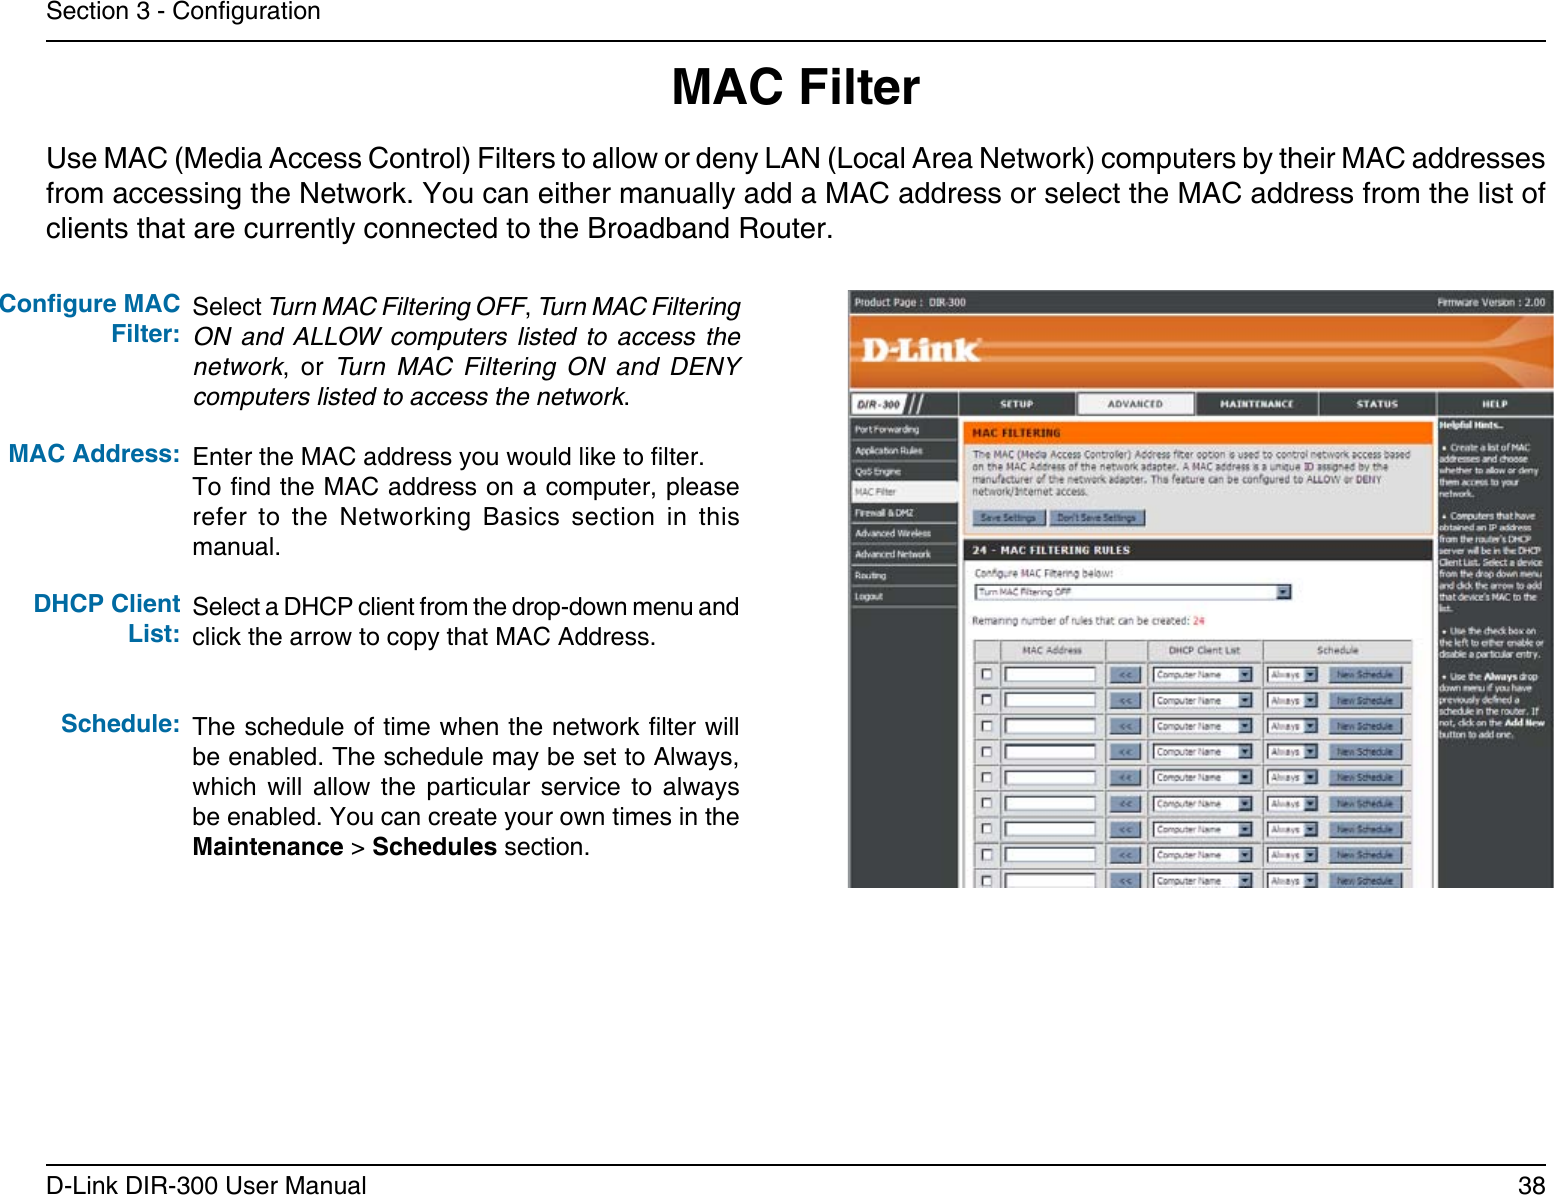 38D-Link DIR-300 User ManualSection 3 - CongurationMAC FilterSelect Turn MAC Filtering OFF, Turn MAC Filtering ON  and  ALLOW  computers  listed  to  access  the network,  or  Turn  MAC  Filtering  ON  and  DENY computers listed to access the network. Enter the MAC address you would like to lter.To nd the MAC address on a computer, please refer  to  the  Networking  Basics  section  in  this manual.Select a DHCP client from the drop-down menu and click the arrow to copy that MAC Address. The schedule of time when the network lter will be enabled. The schedule may be set to Always, which  will  allow  the  particular  service  to  always be enabled. You can create your own times in the Maintenance &gt; Schedules section.Congure MAC Filter:MAC Address: DHCP Client List:Schedule:Use MAC (Media Access Control) Filters to allow or deny LAN (Local Area Network) computers by their MAC addresses from accessing the Network. You can either manually add a MAC address or select the MAC address from the list of clients that are currently connected to the Broadband Router.